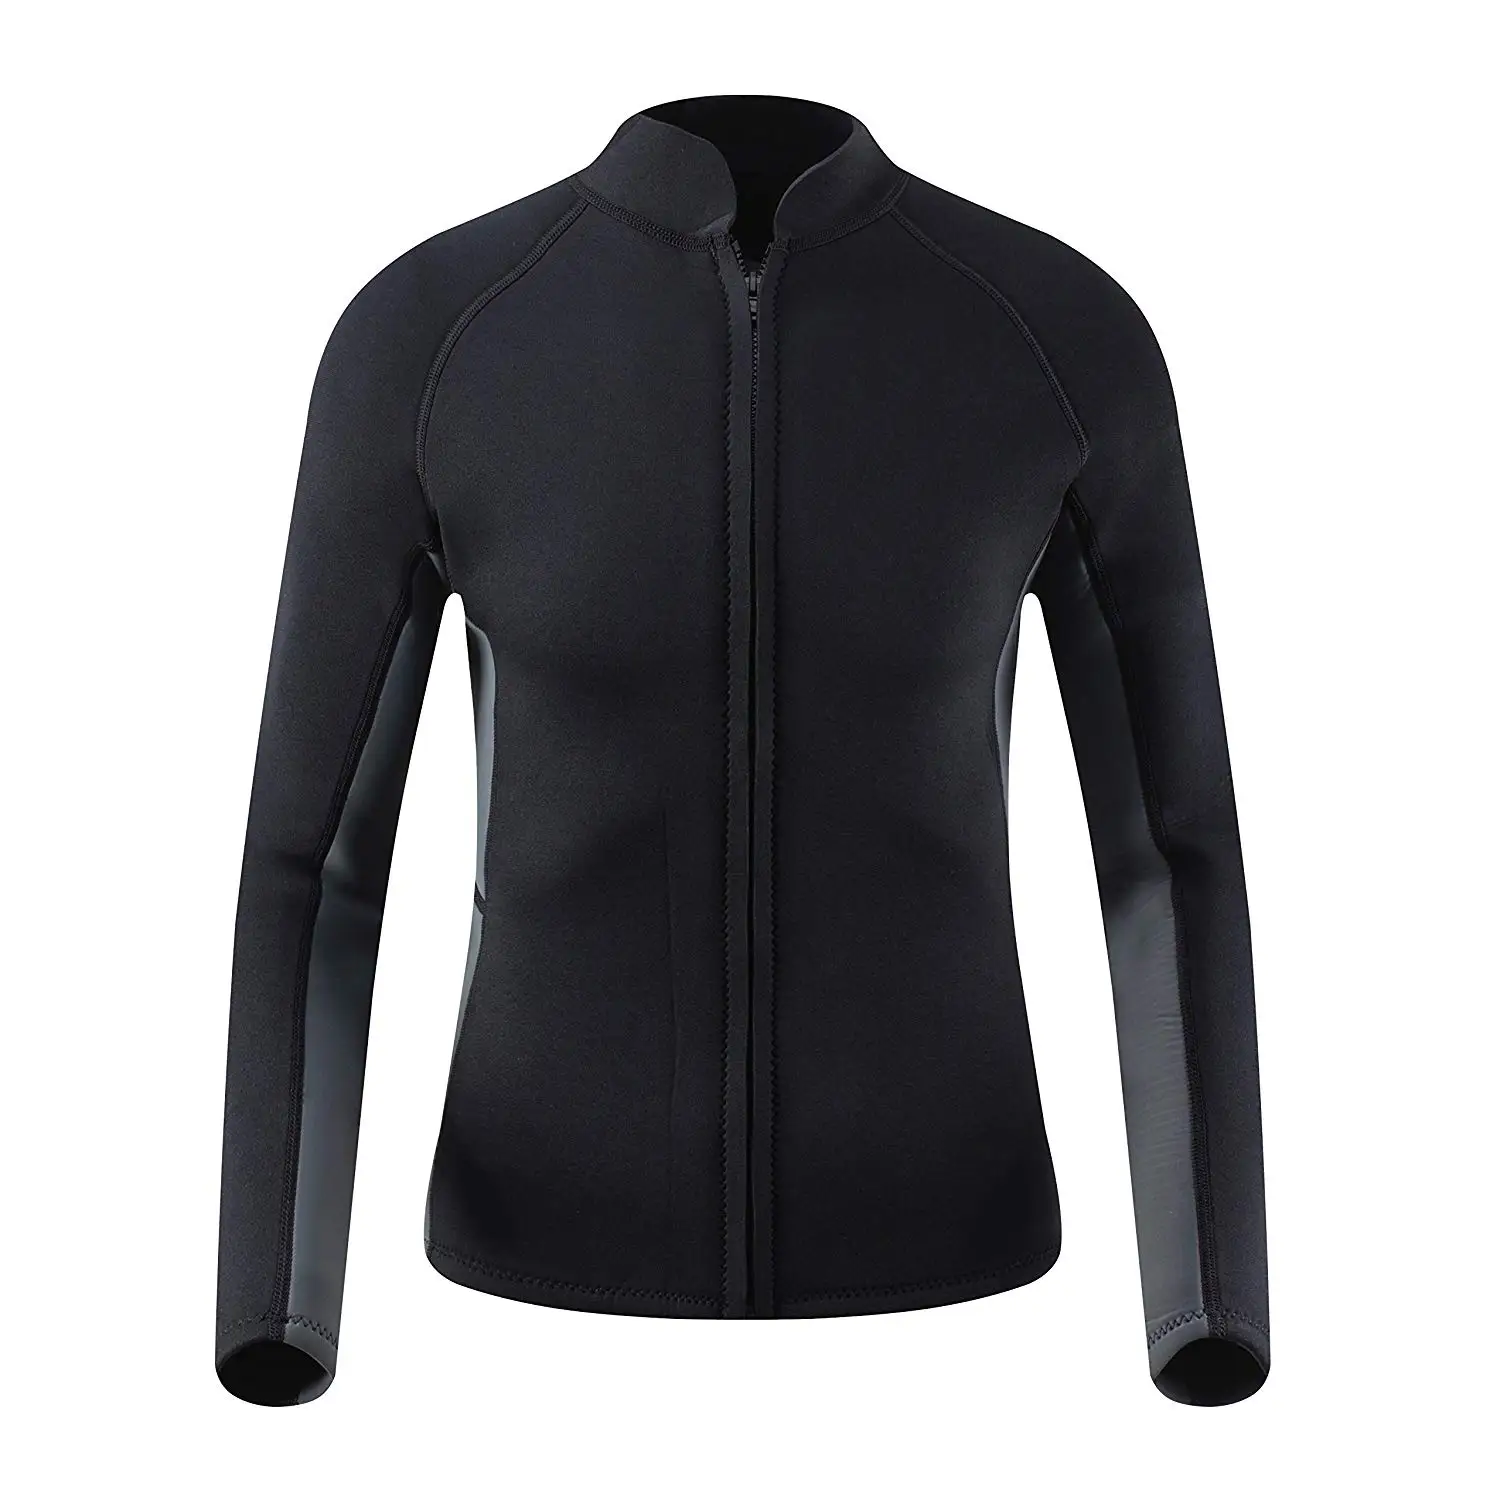 Cheap 3mm Wetsuit Jacket, find 3mm Wetsuit Jacket deals on line at ...